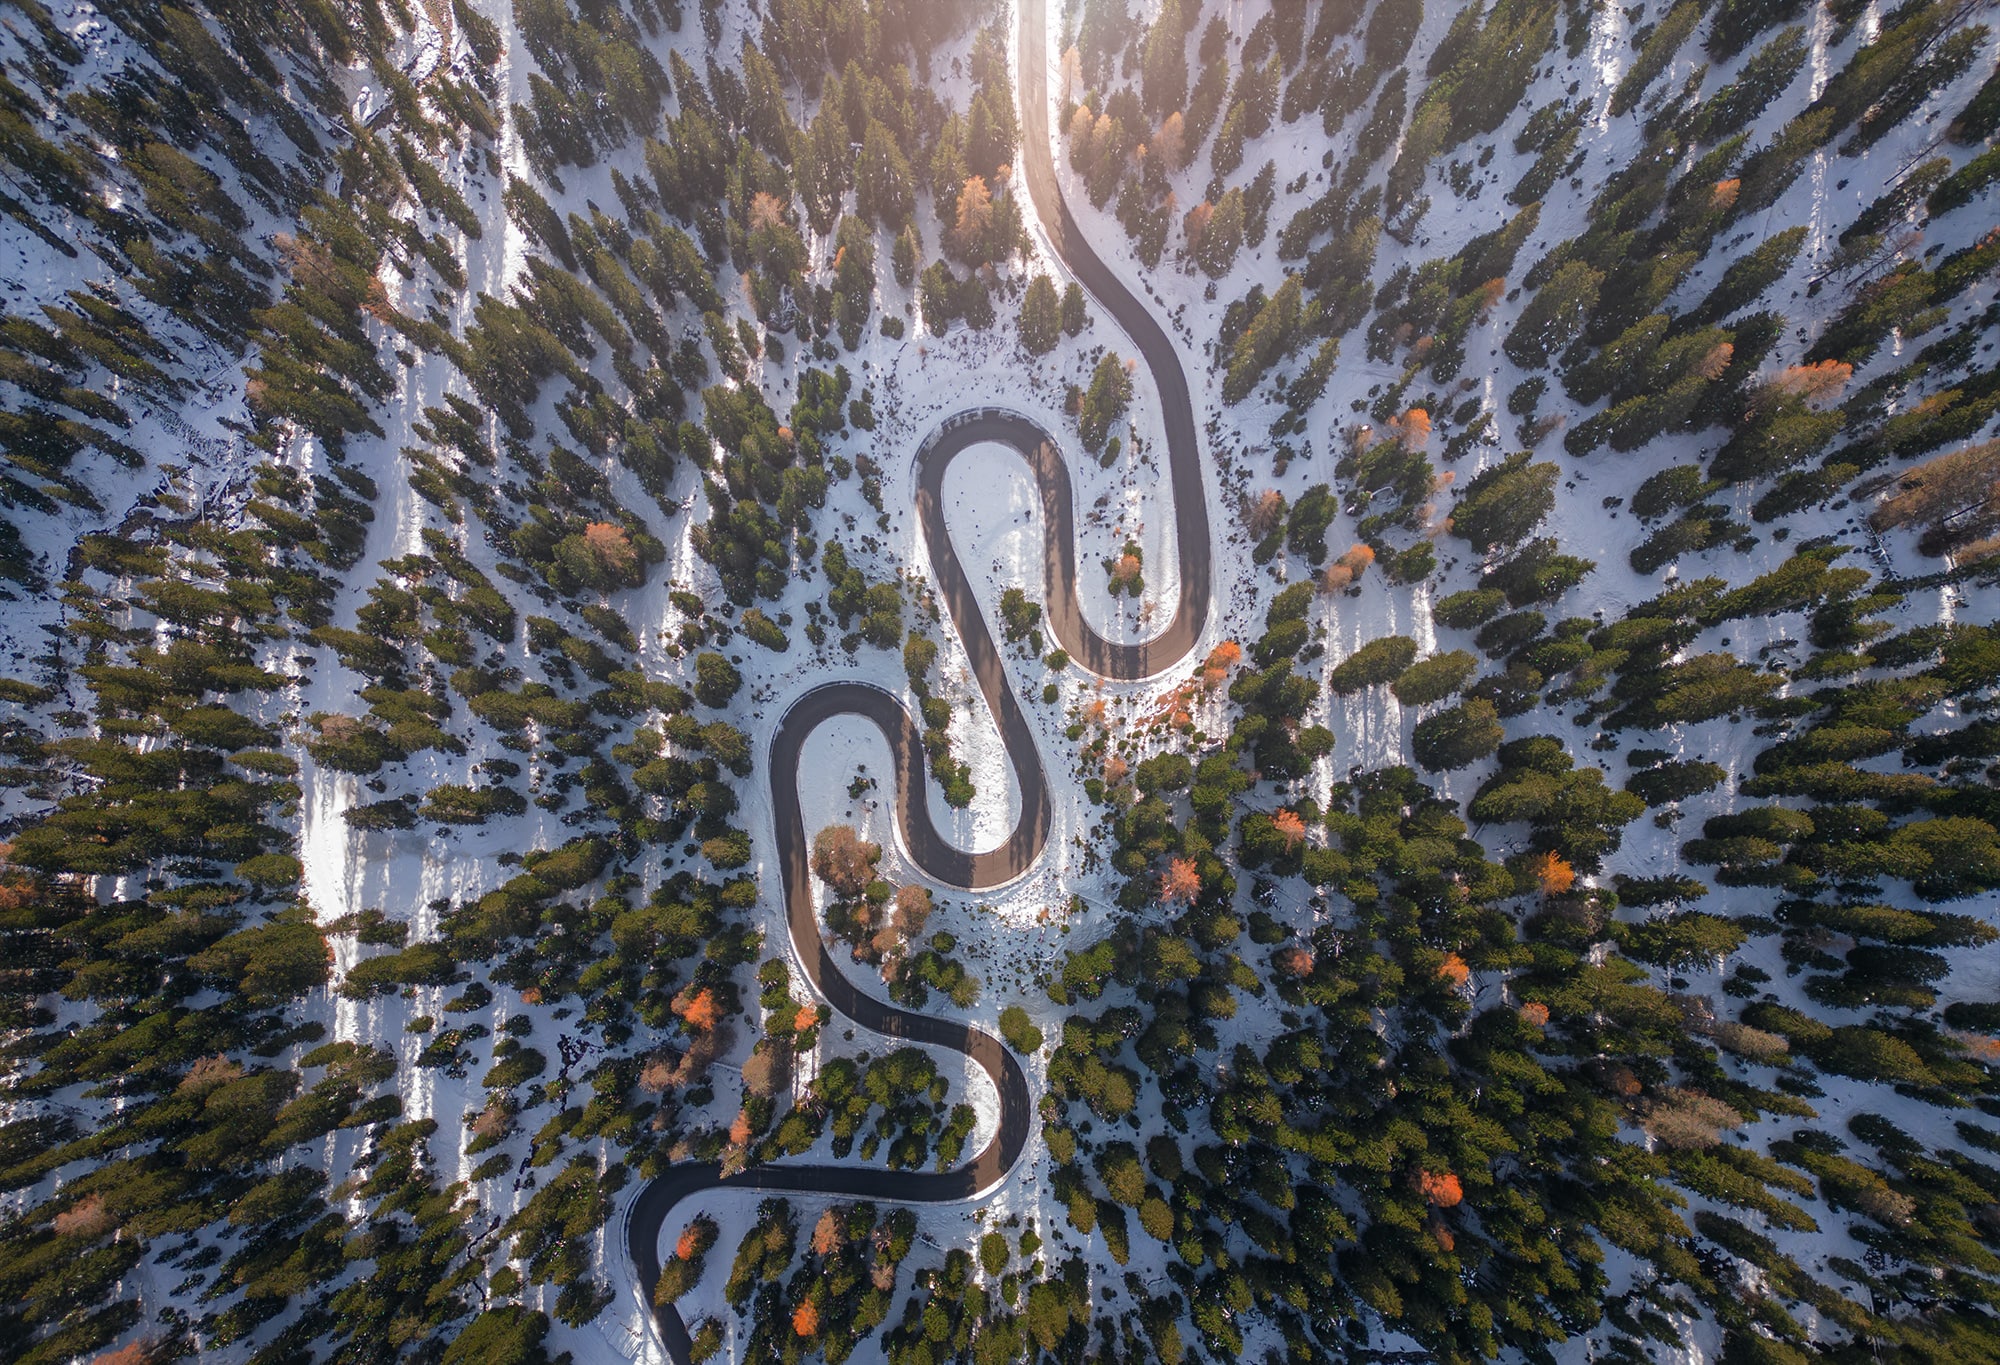 Aerial view over the Snake Road in the Dolomites, located on the Passo Giau road.